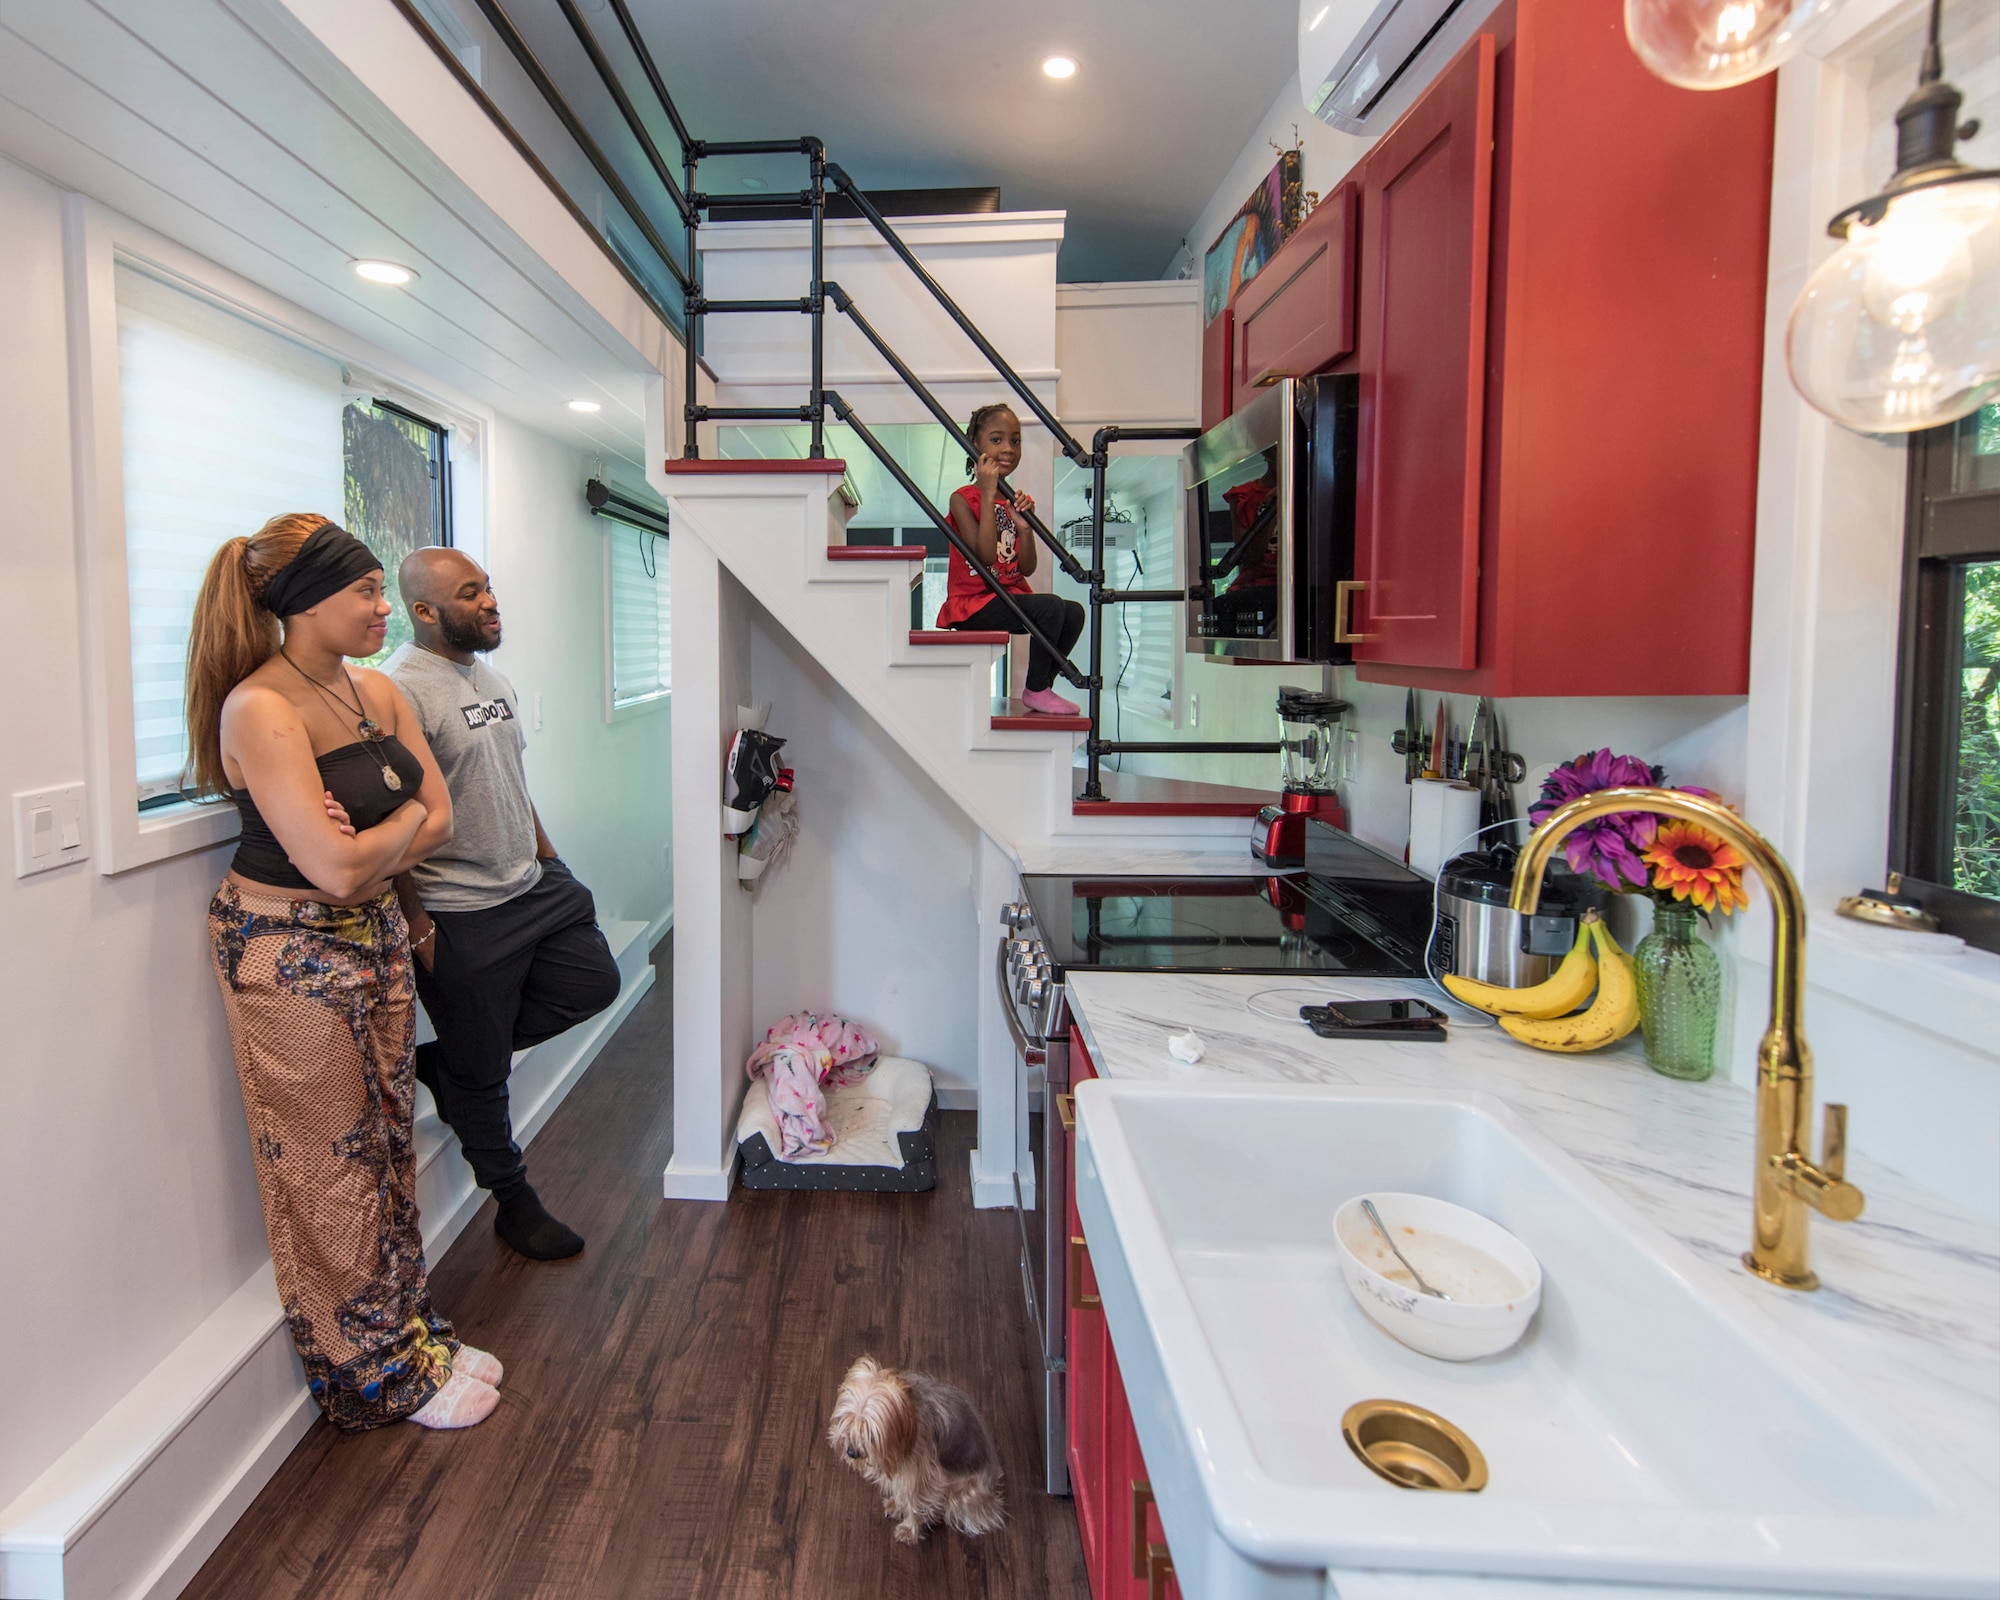 Staff Sgt. Kevin Inniss and his wife, Shanice, along with their dog Quincy, watch as their daughter, Urie, sits proudly on the stairs of the family's newly-constructed Tiny Home.  The Inniss family received a grant courtesy of Operation Tiny Home, a national non-profit organization in partnership with Sutter Home Family Vineyards, to build 400-square-feet of living space to call their own. (U.S. Air Force photo by Matthew S. Jurgens)